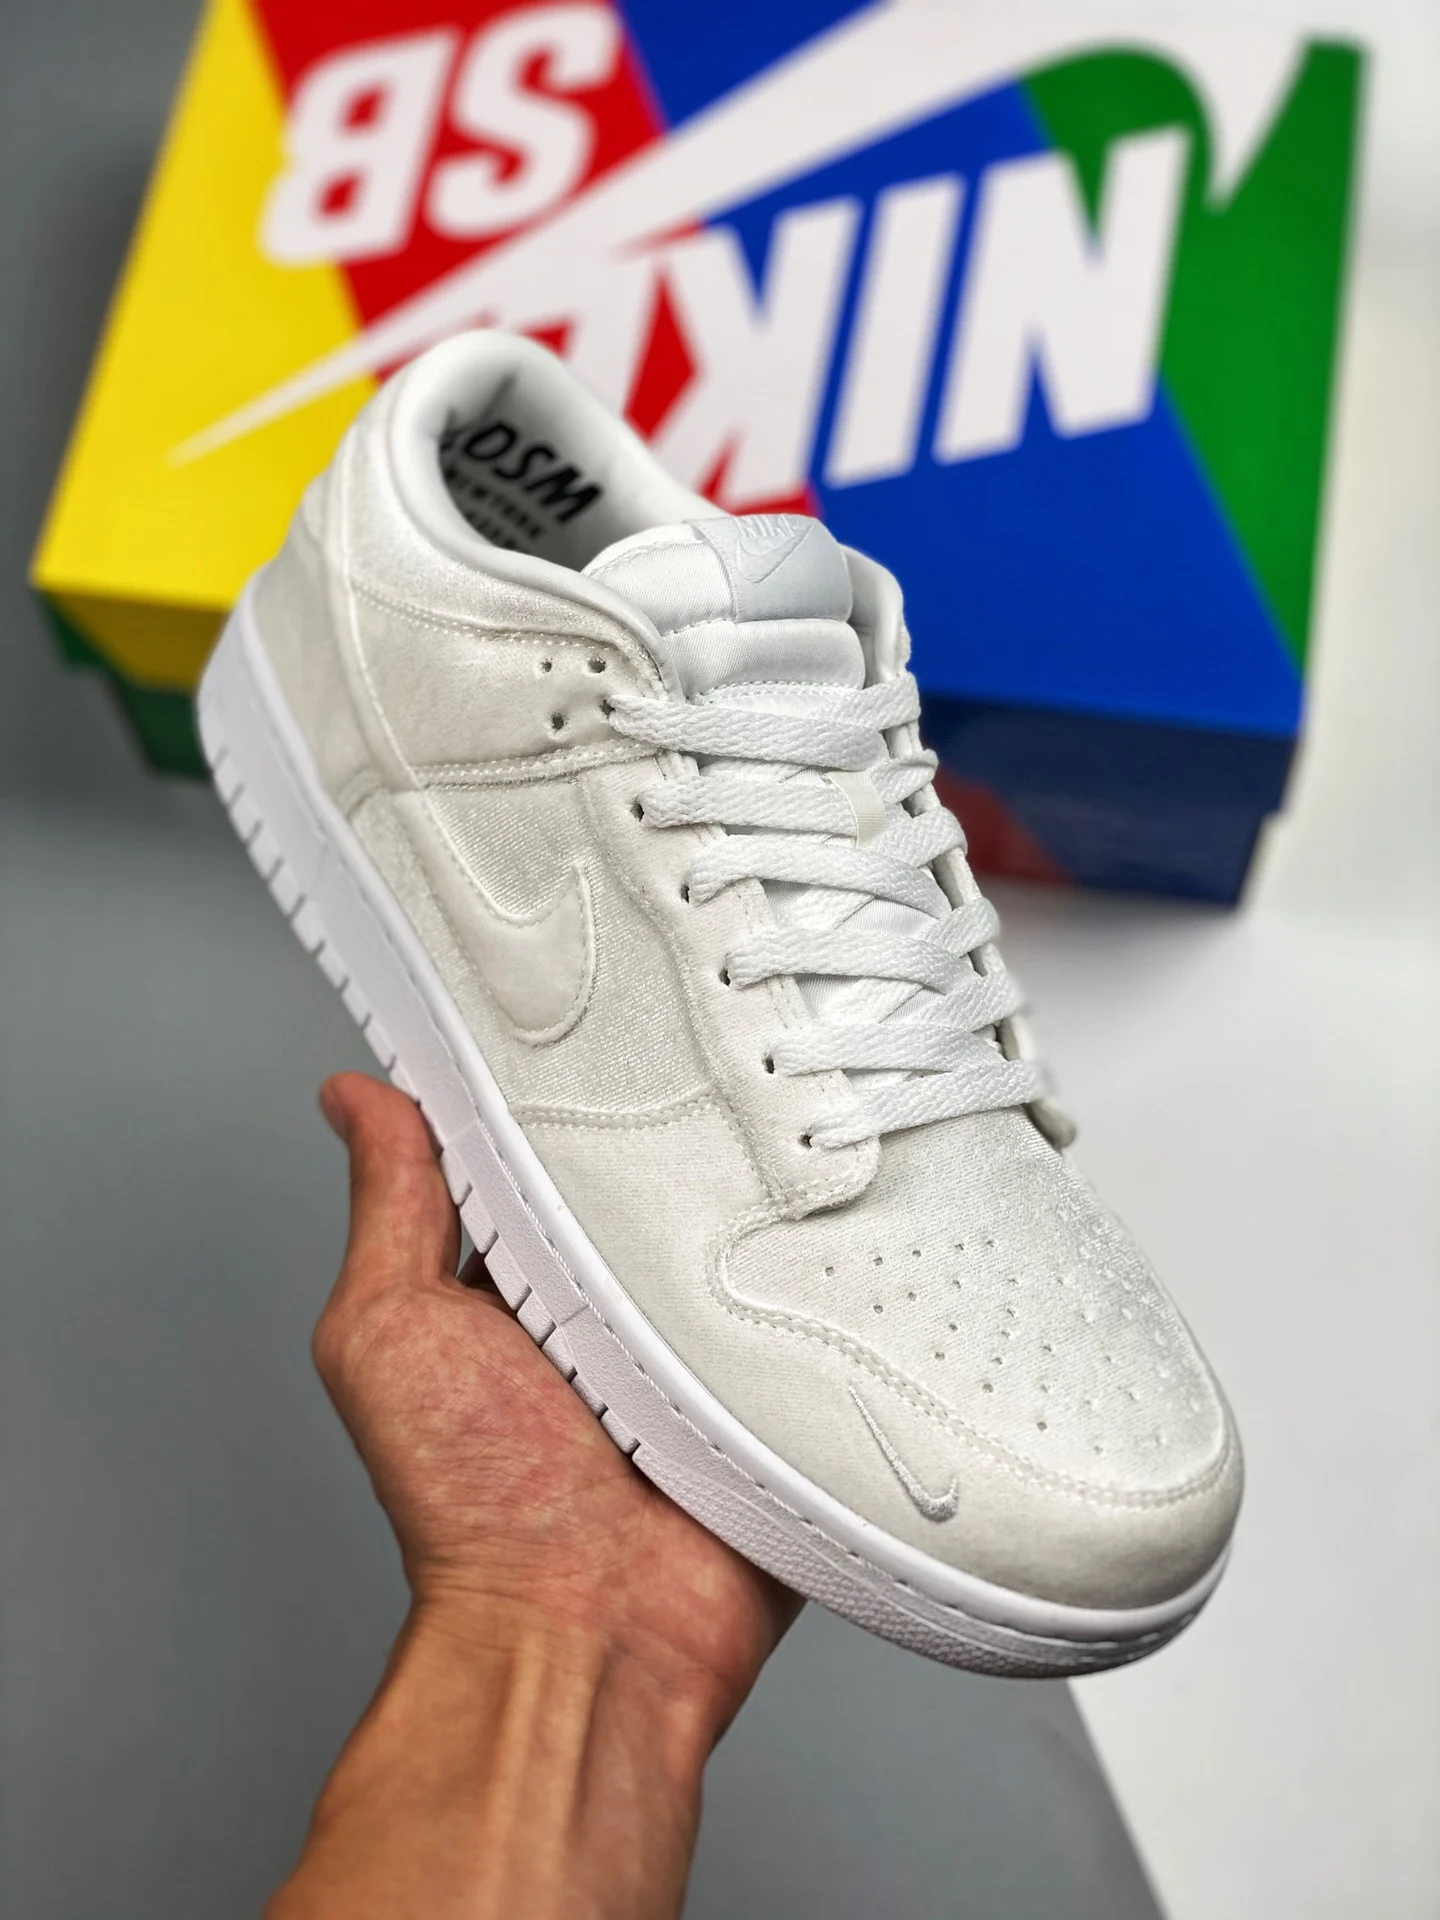 Dover Street Market x Nike Dunk Low Triple White DH2686-100 For Sale